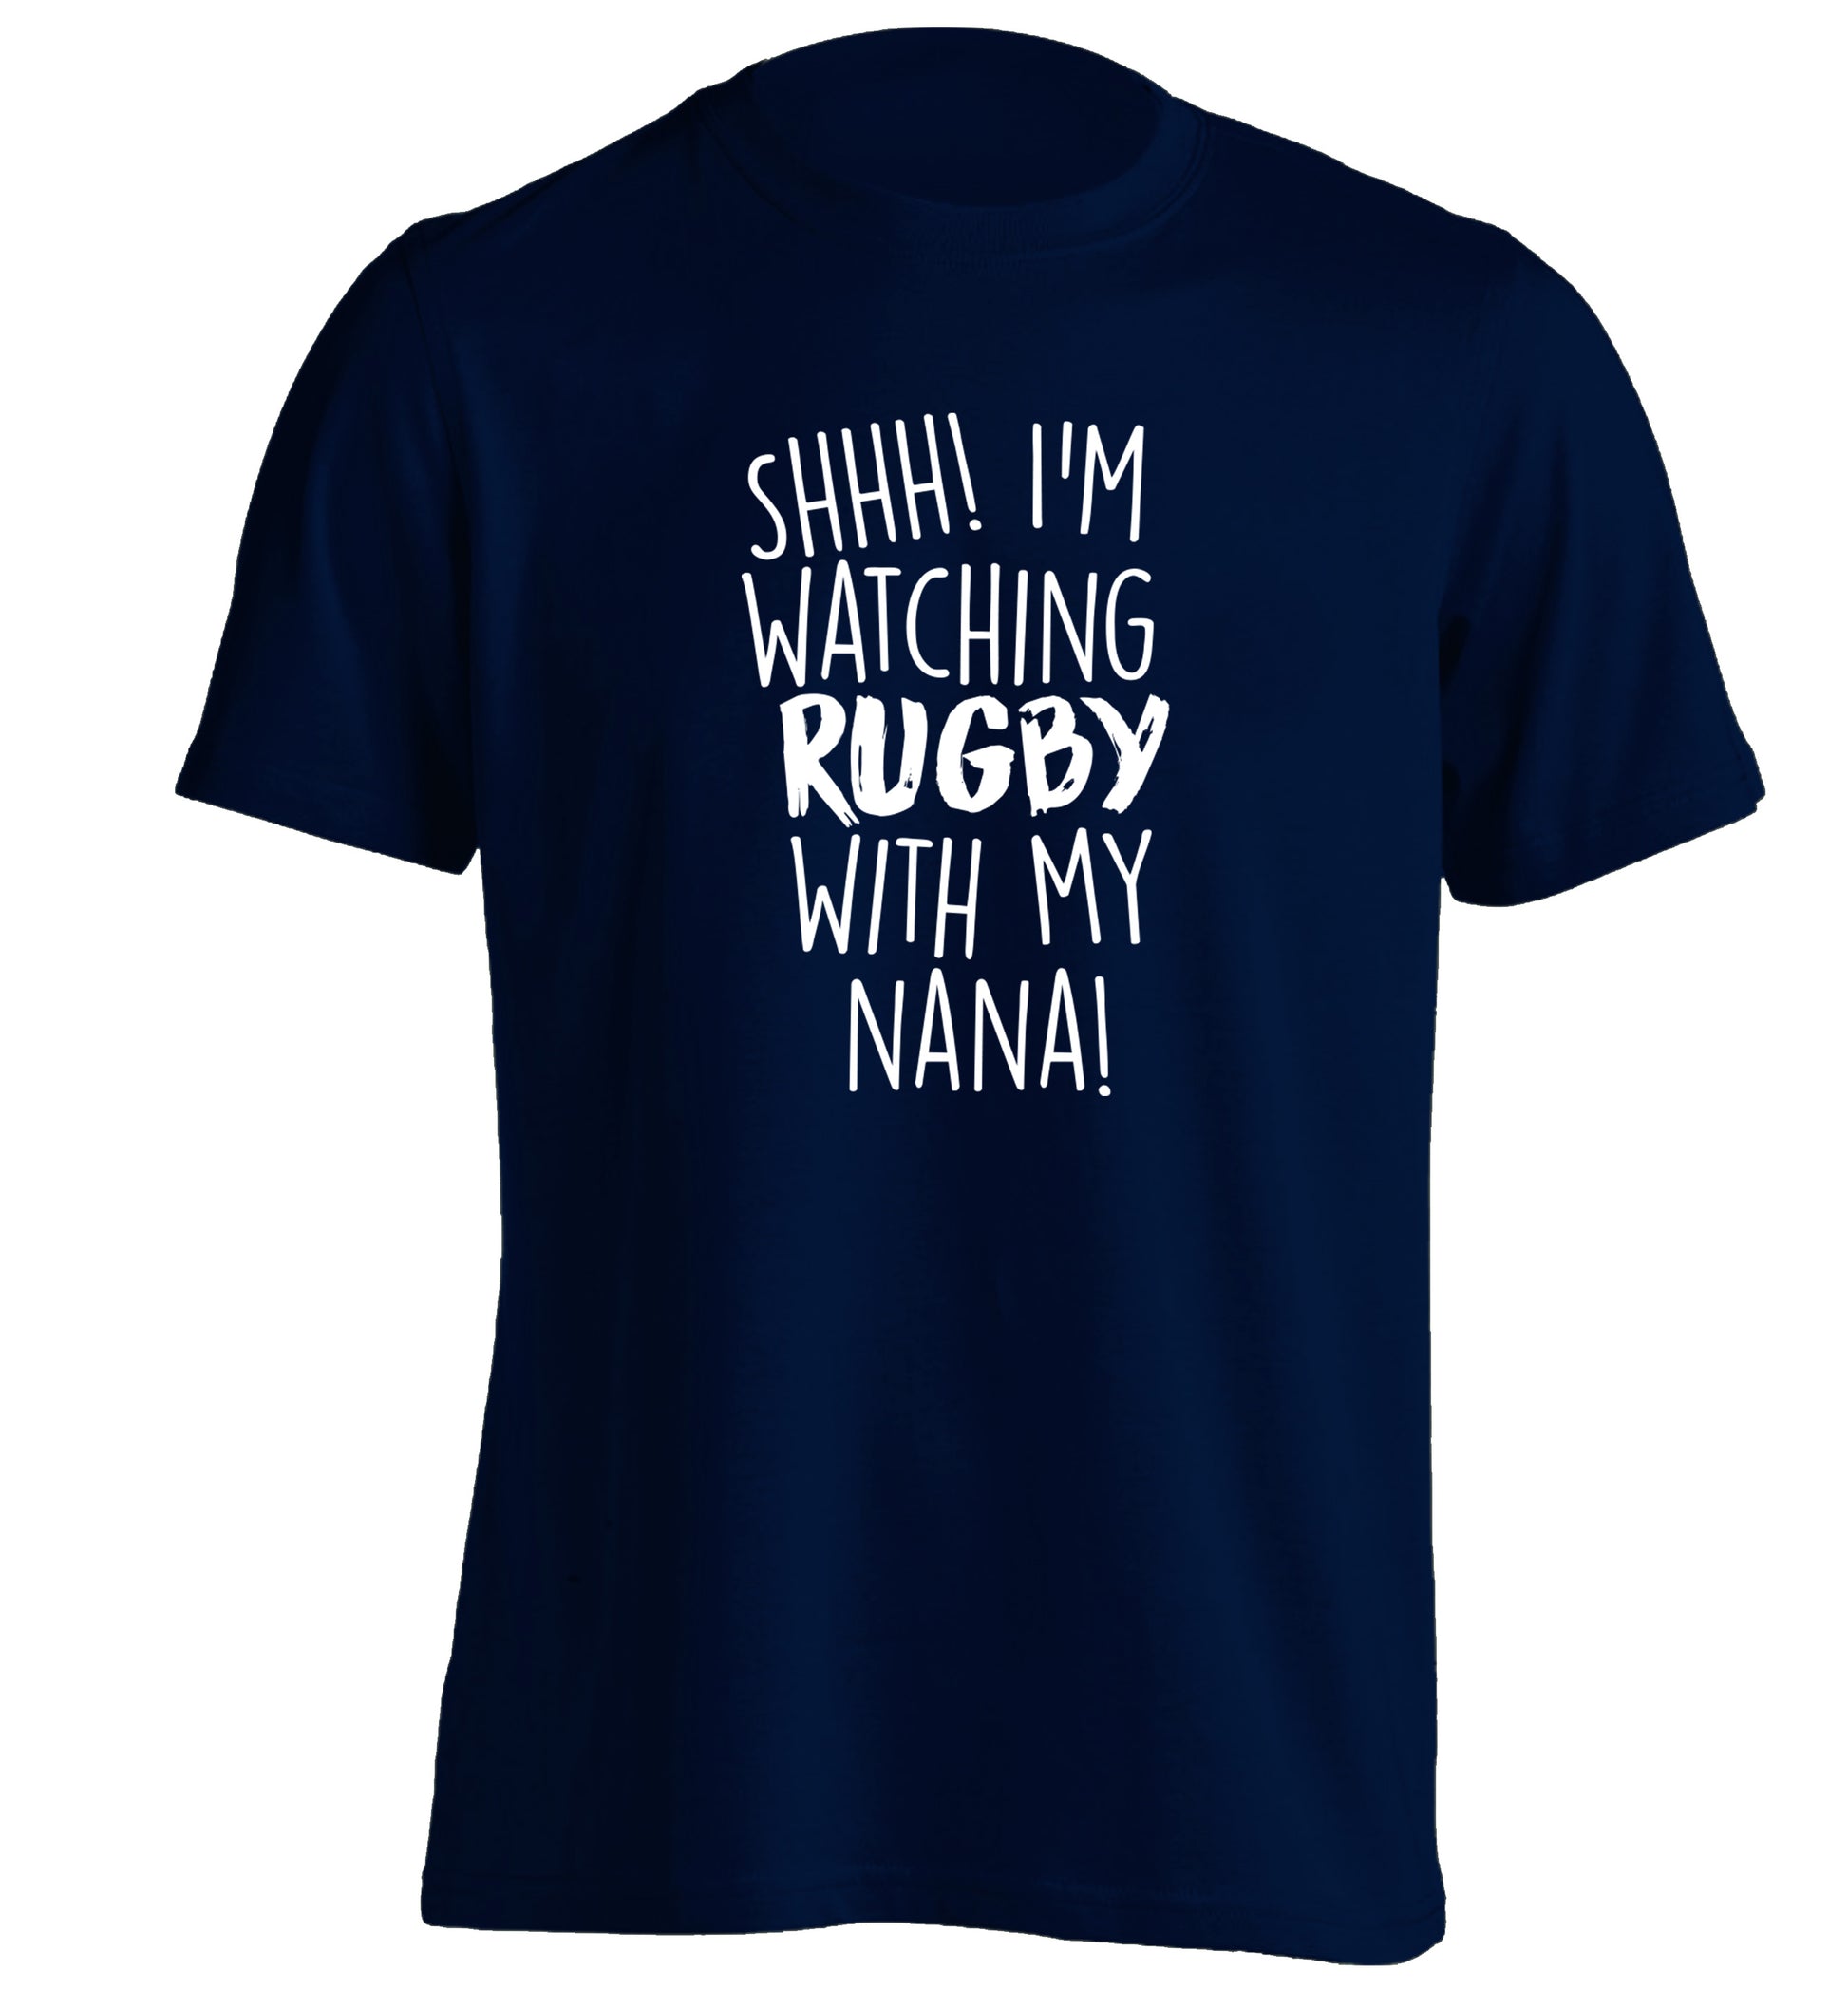 Shh I'm watching rugby with my nana adults unisex navy Tshirt 2XL